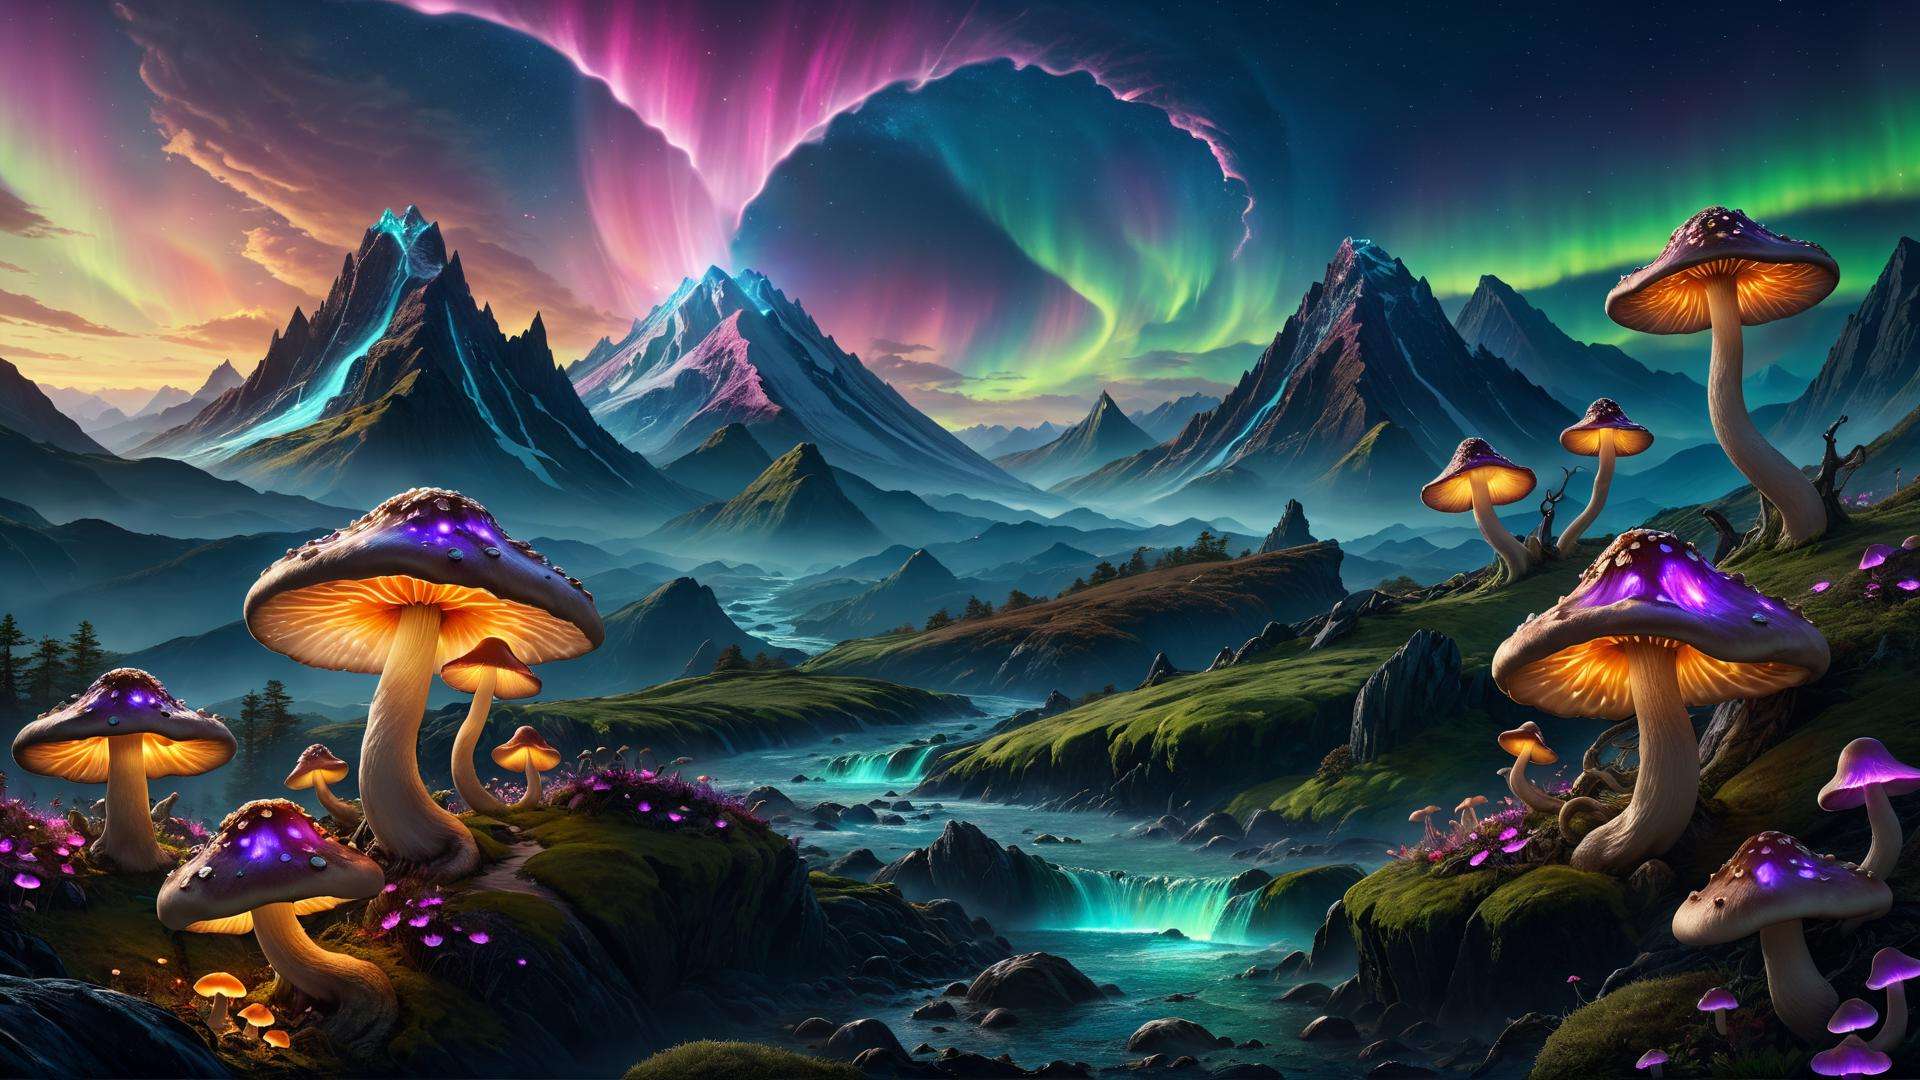 (photorealistic:1.2, Fujifilm XT3), fantasy landscape, mountains, tsunami, mountains in the distance, glowing mushrooms, uplifting, aurora, lord of the rings, (masterpiece:1.2), (epic composition:1.4), (talent:1.2), ultra detailed, cinematic lighting, highly detailed, insanely detailed, (photorealistic:1.2), hdr, 8k, exquisite, sharp, elegant, ambient lighting, fantasy vivid colors, high quality,